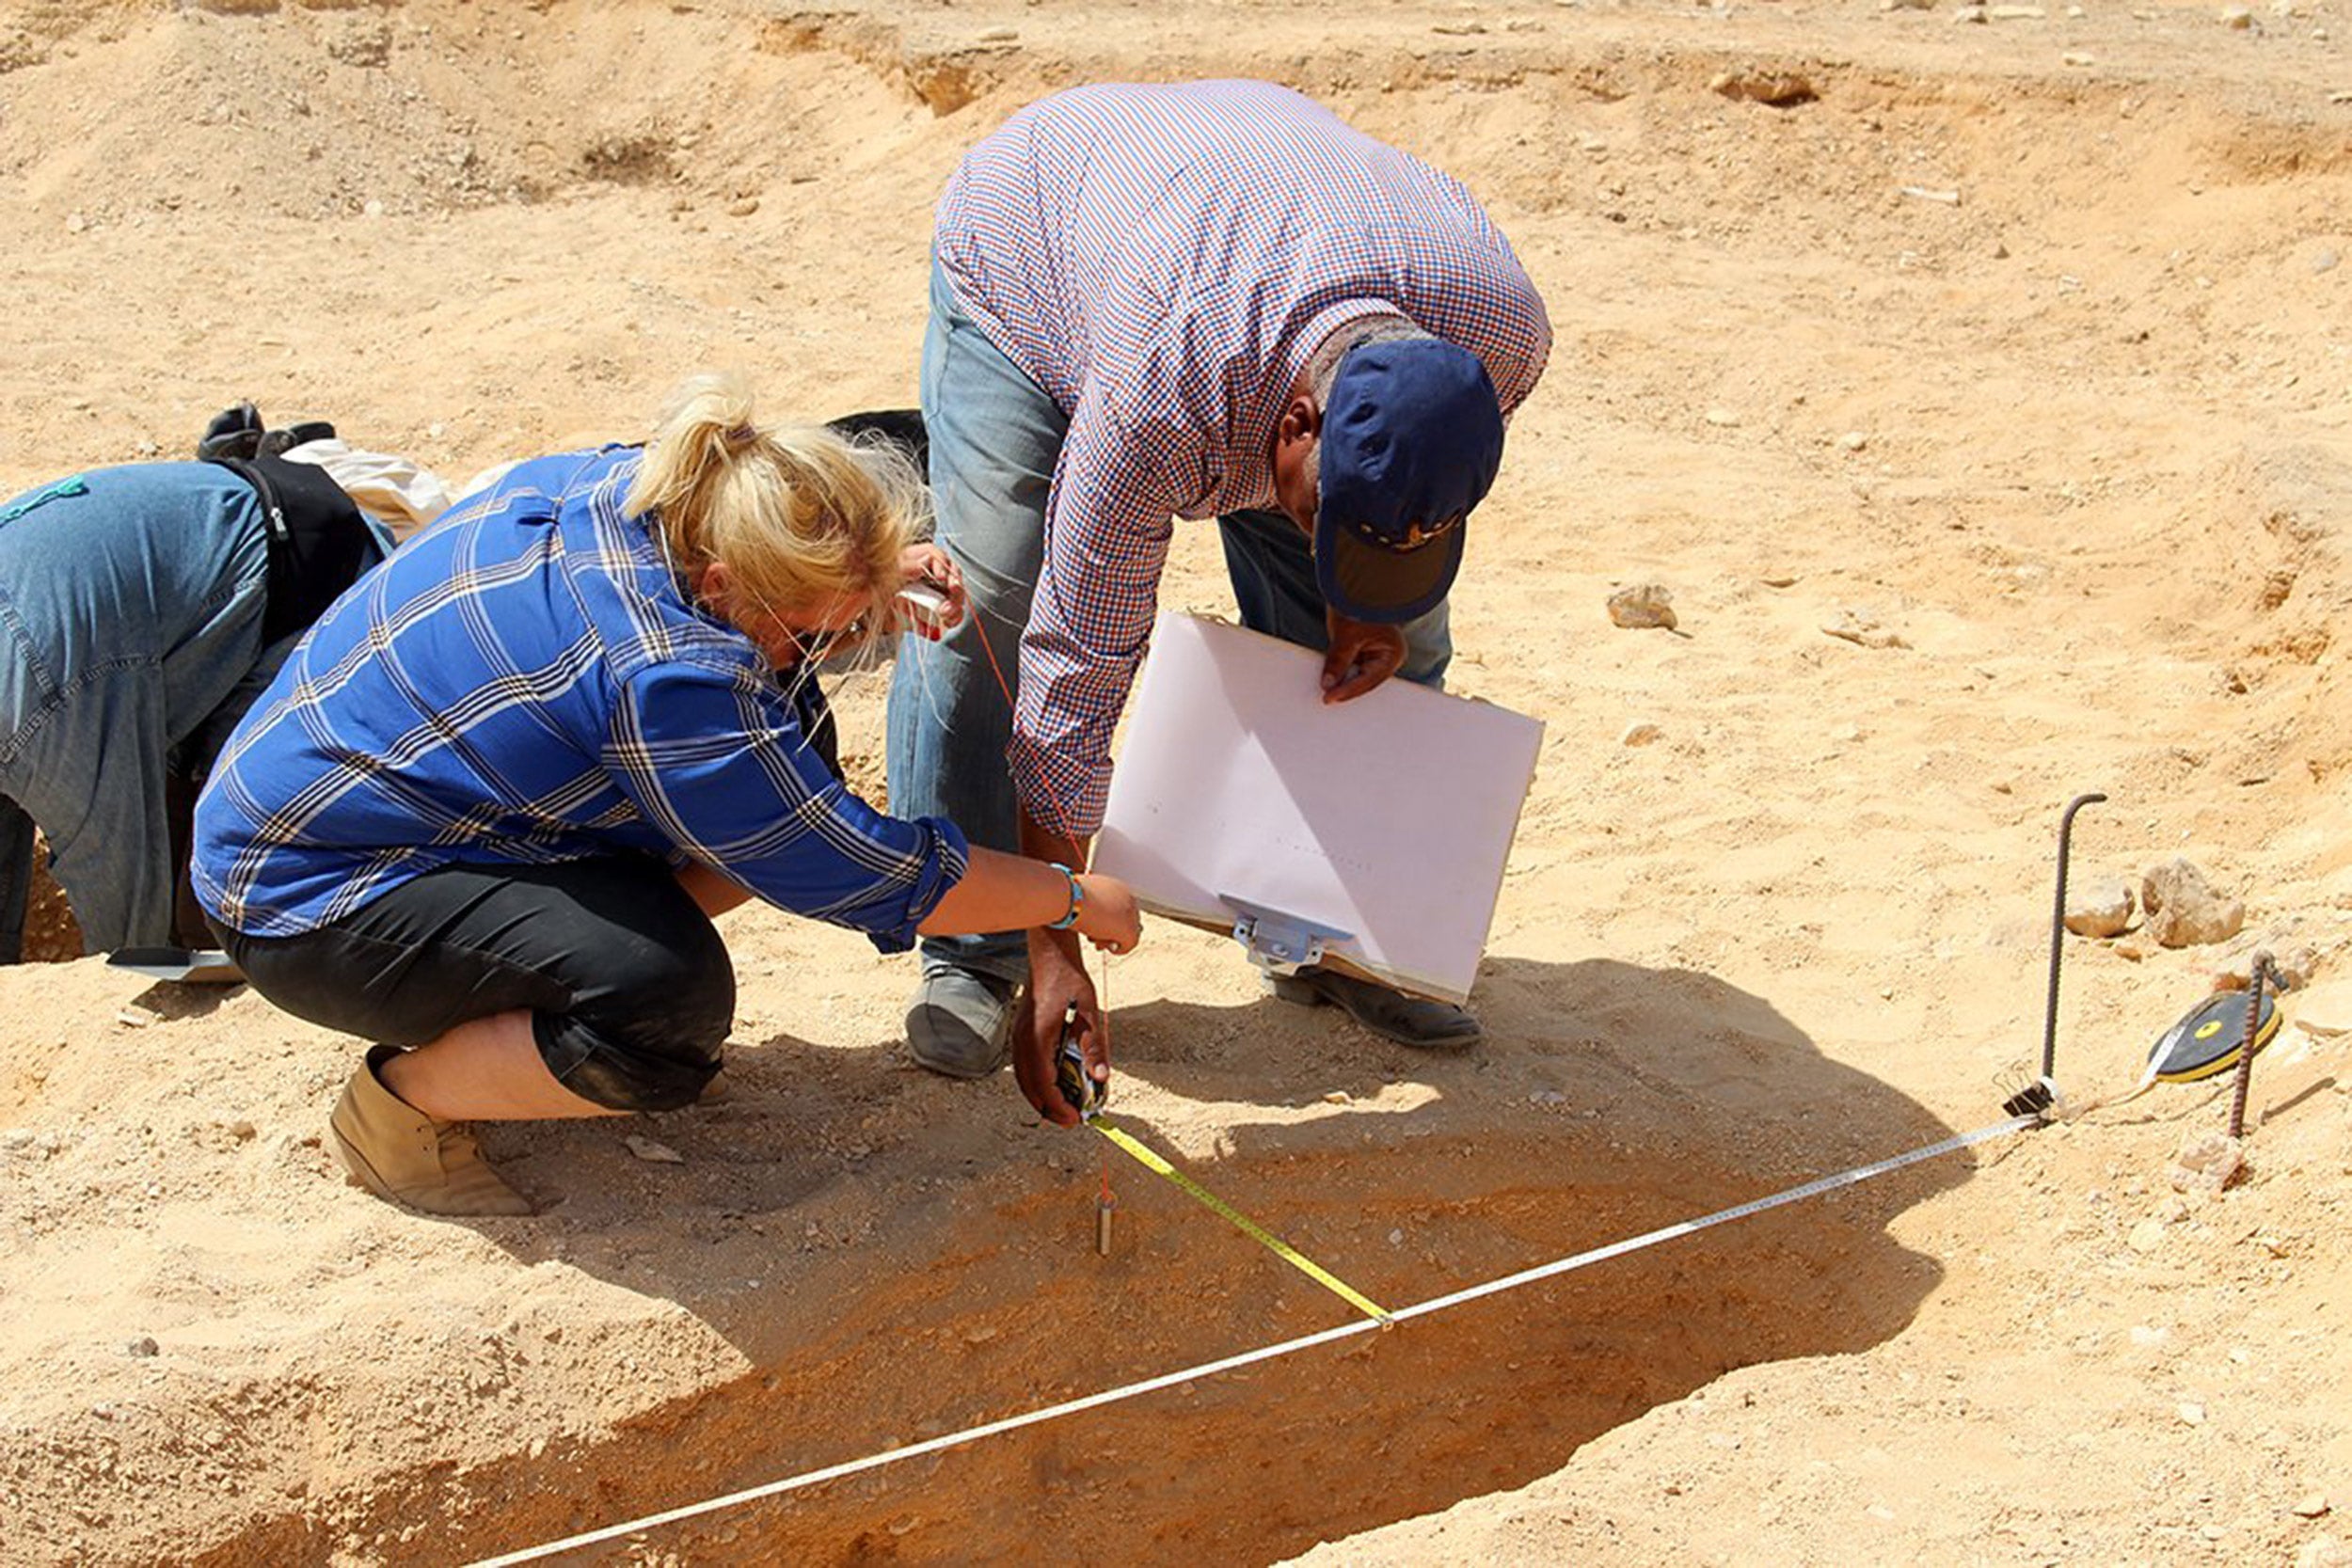 Two people at an archaeology site.